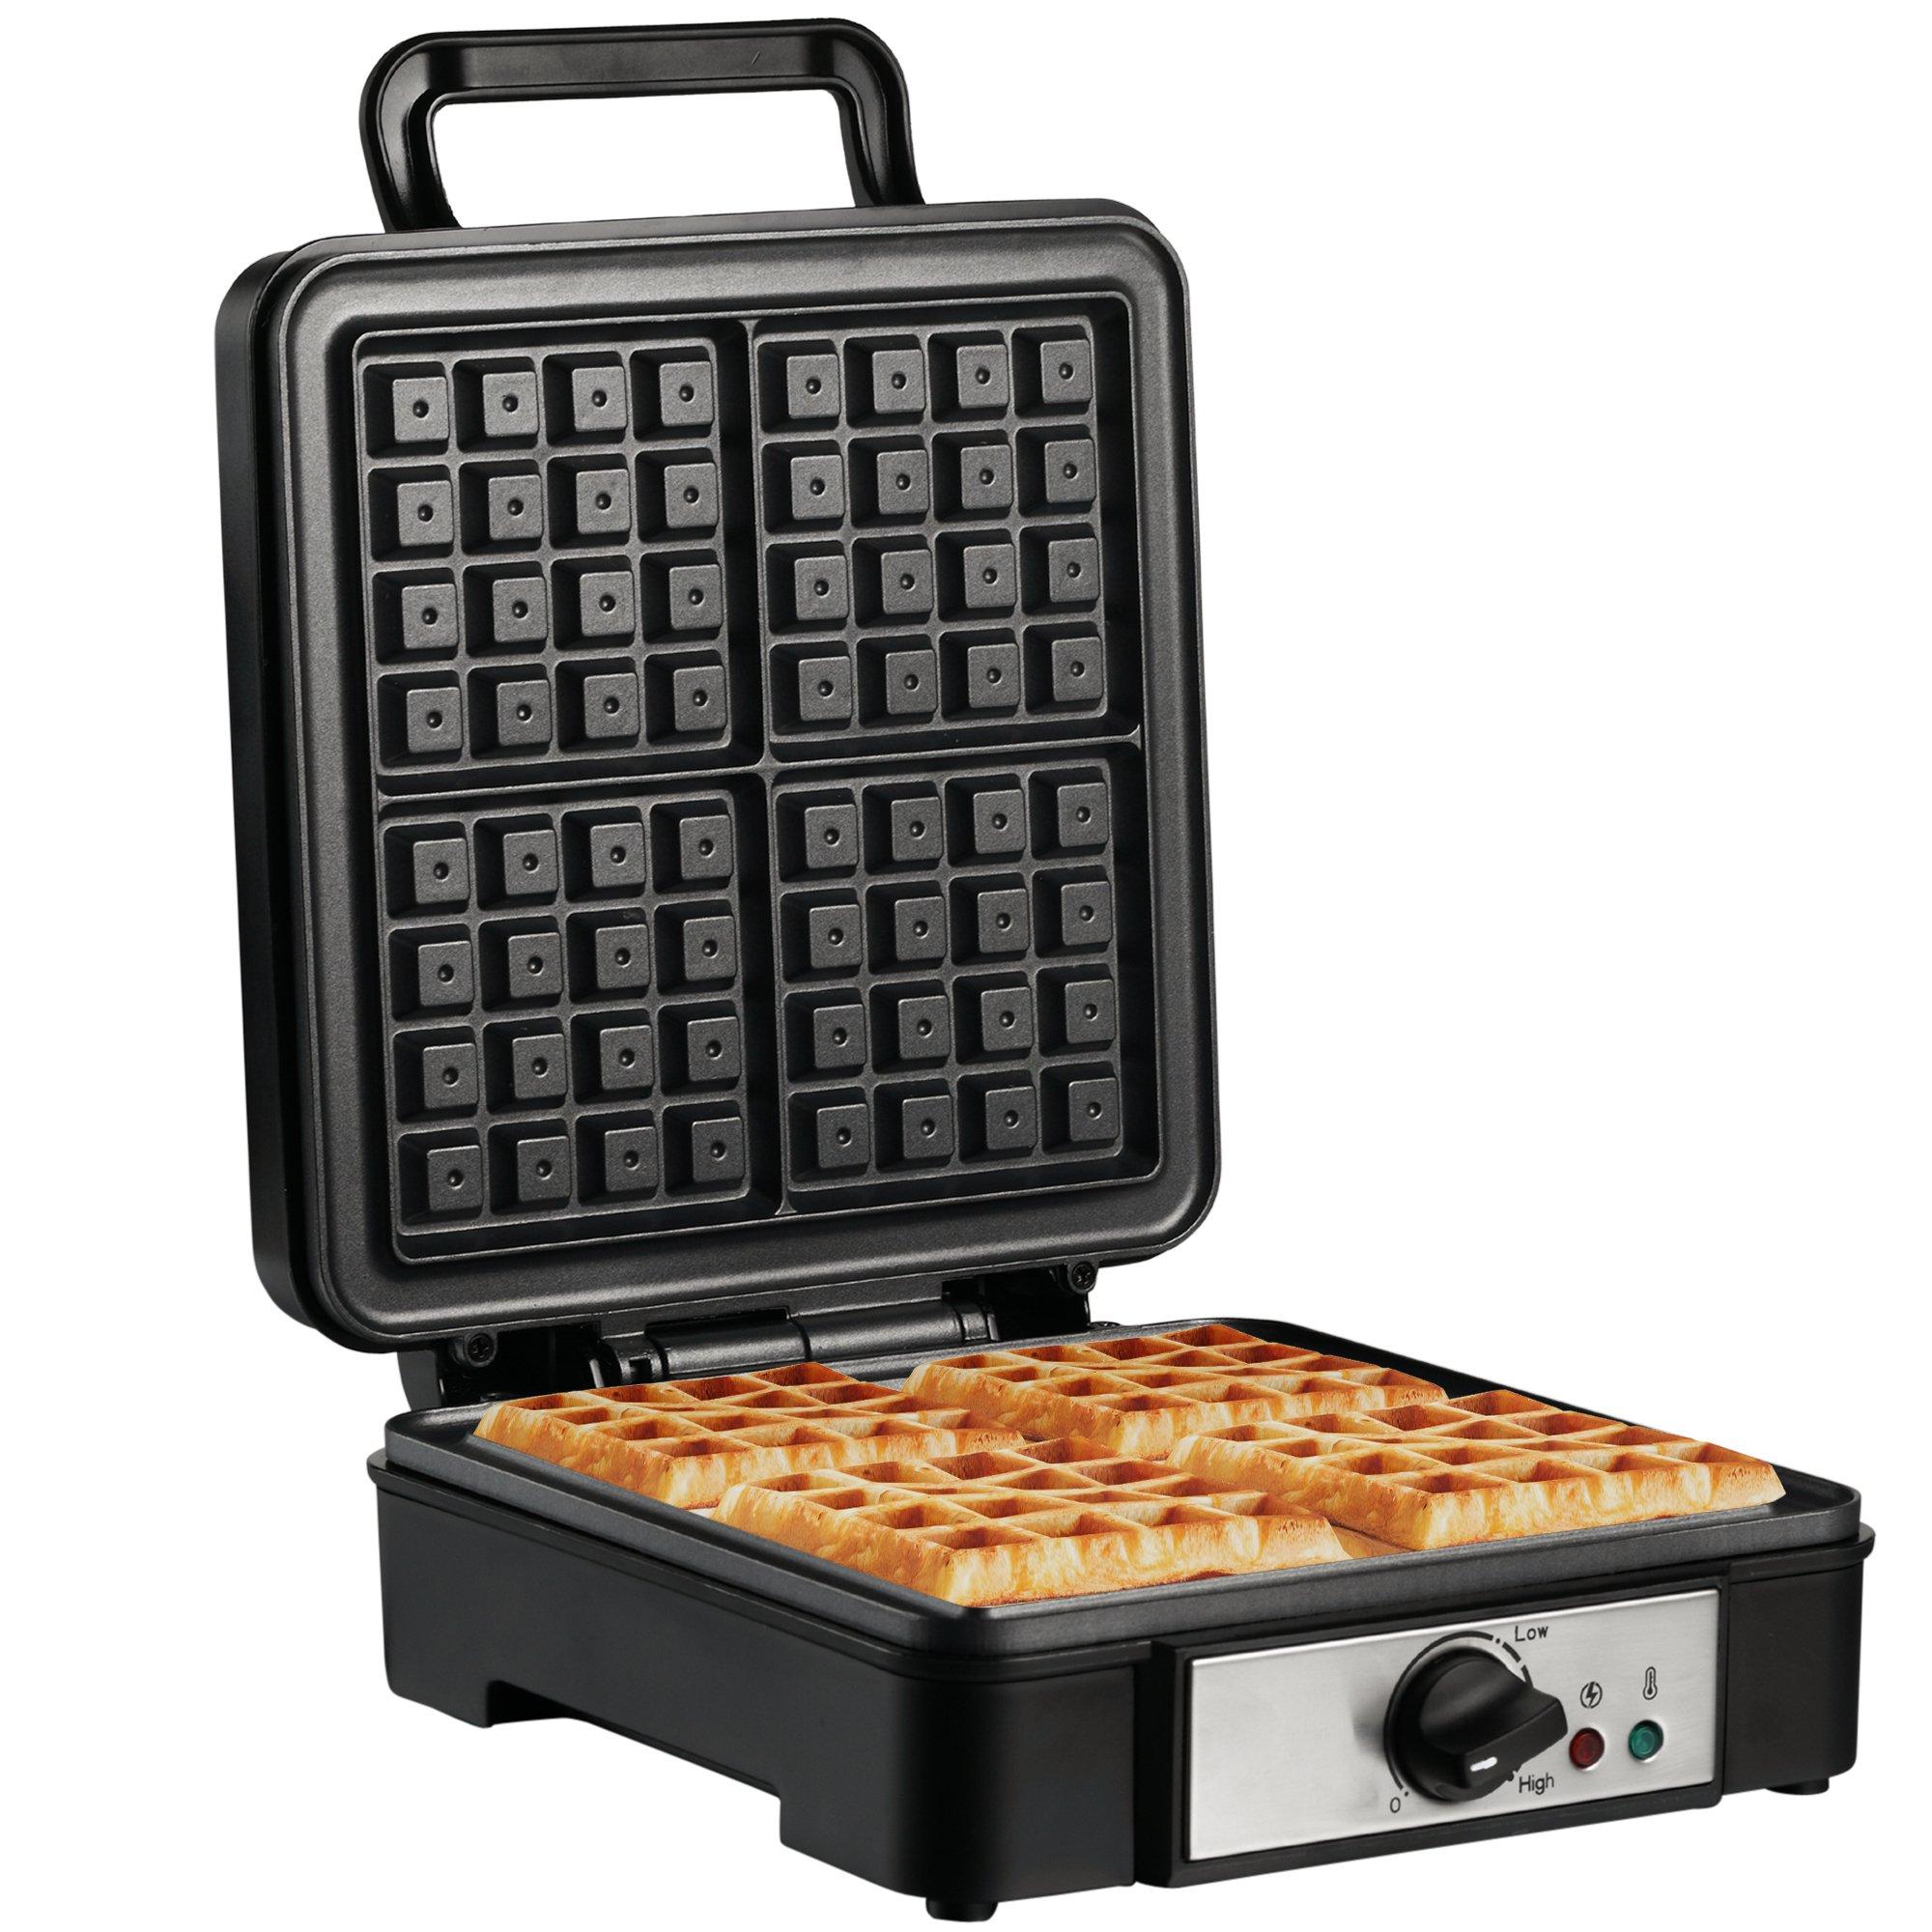 4 Slice Waffle Maker w/ Non-stick Cooking Plate Adjustable Temperature